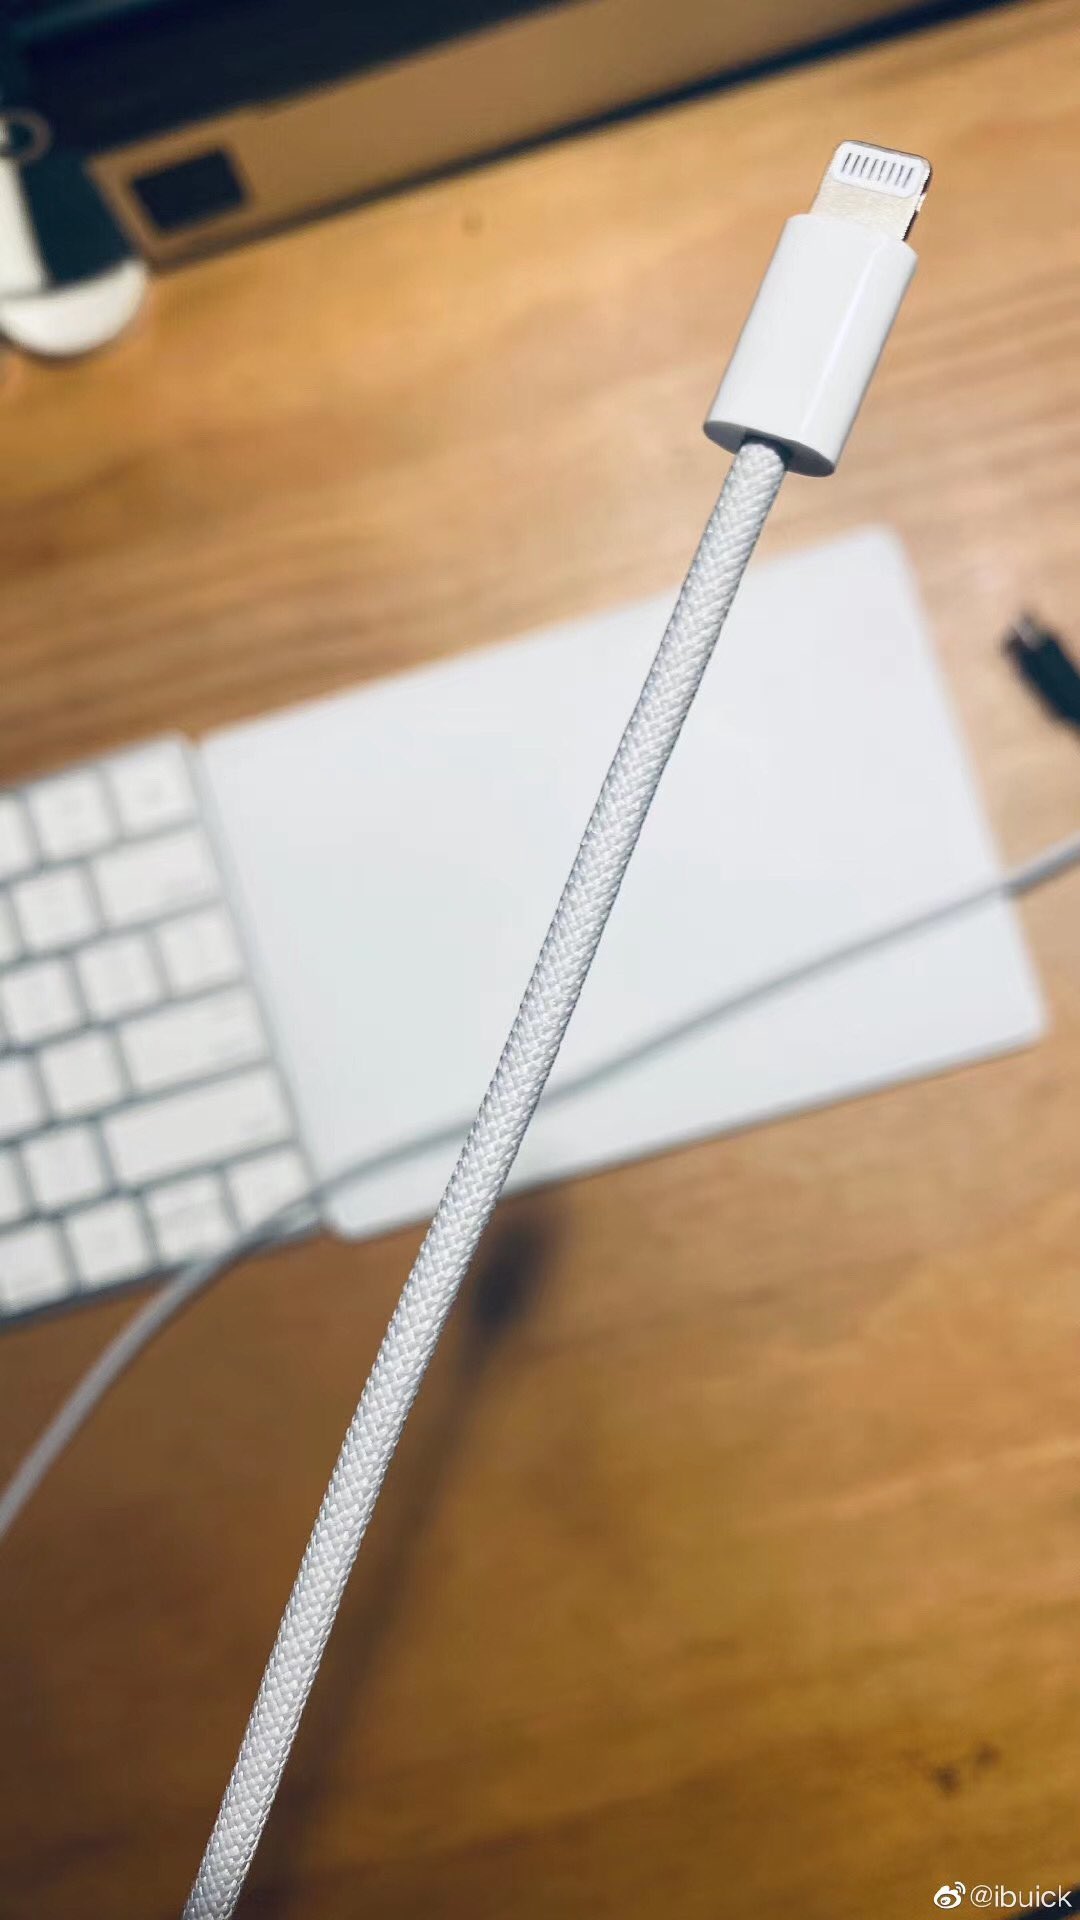 Photos of Apple's Alleged New Braided Lightning Cable for iPhone 12